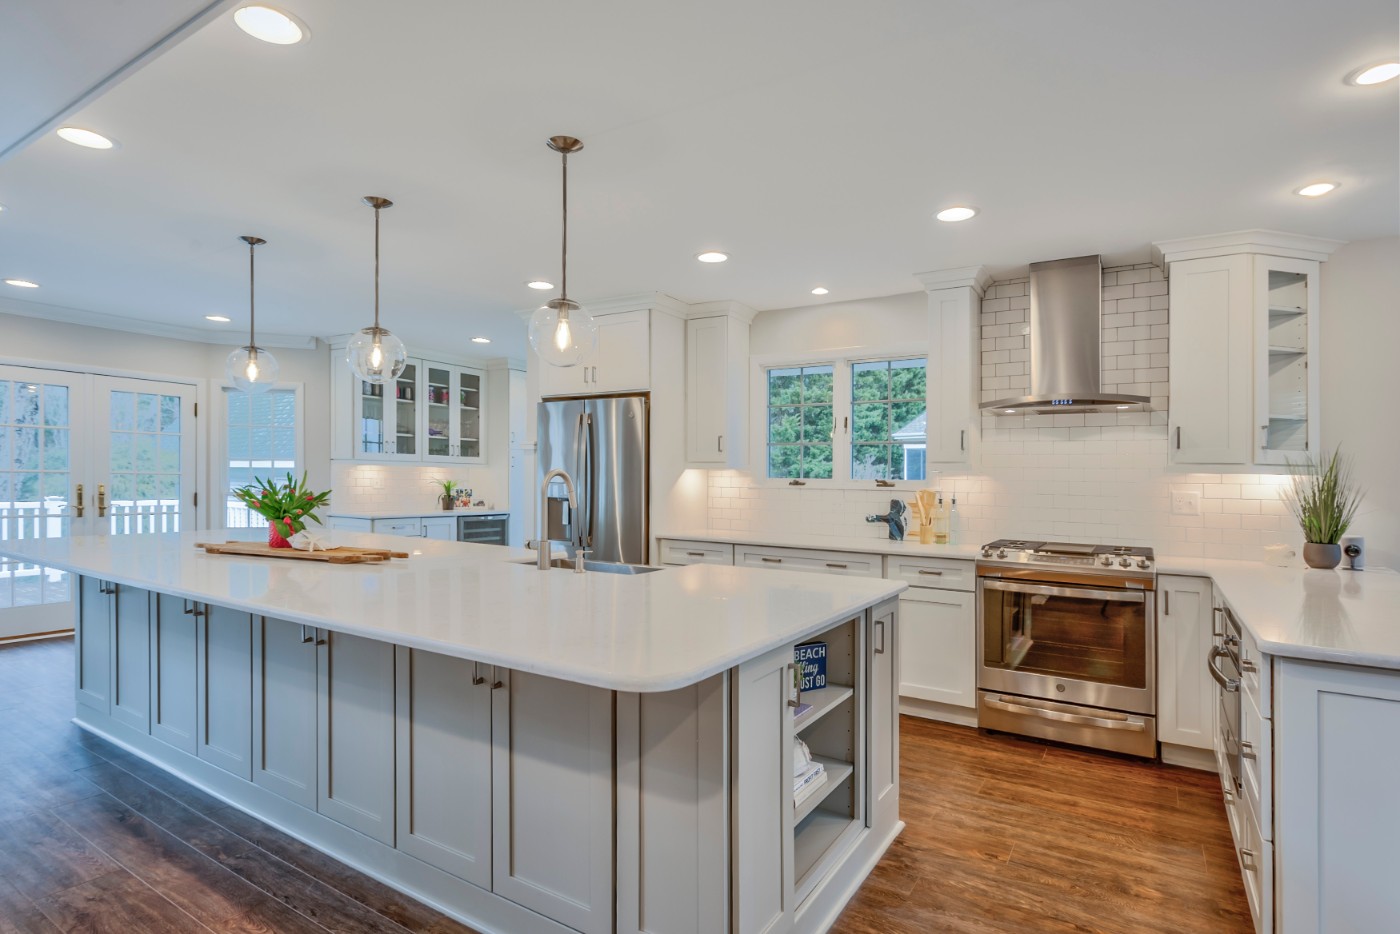 Canal Way Kitchen Remodel in Bethany Beach DE with Three Vintage Pendant Lights